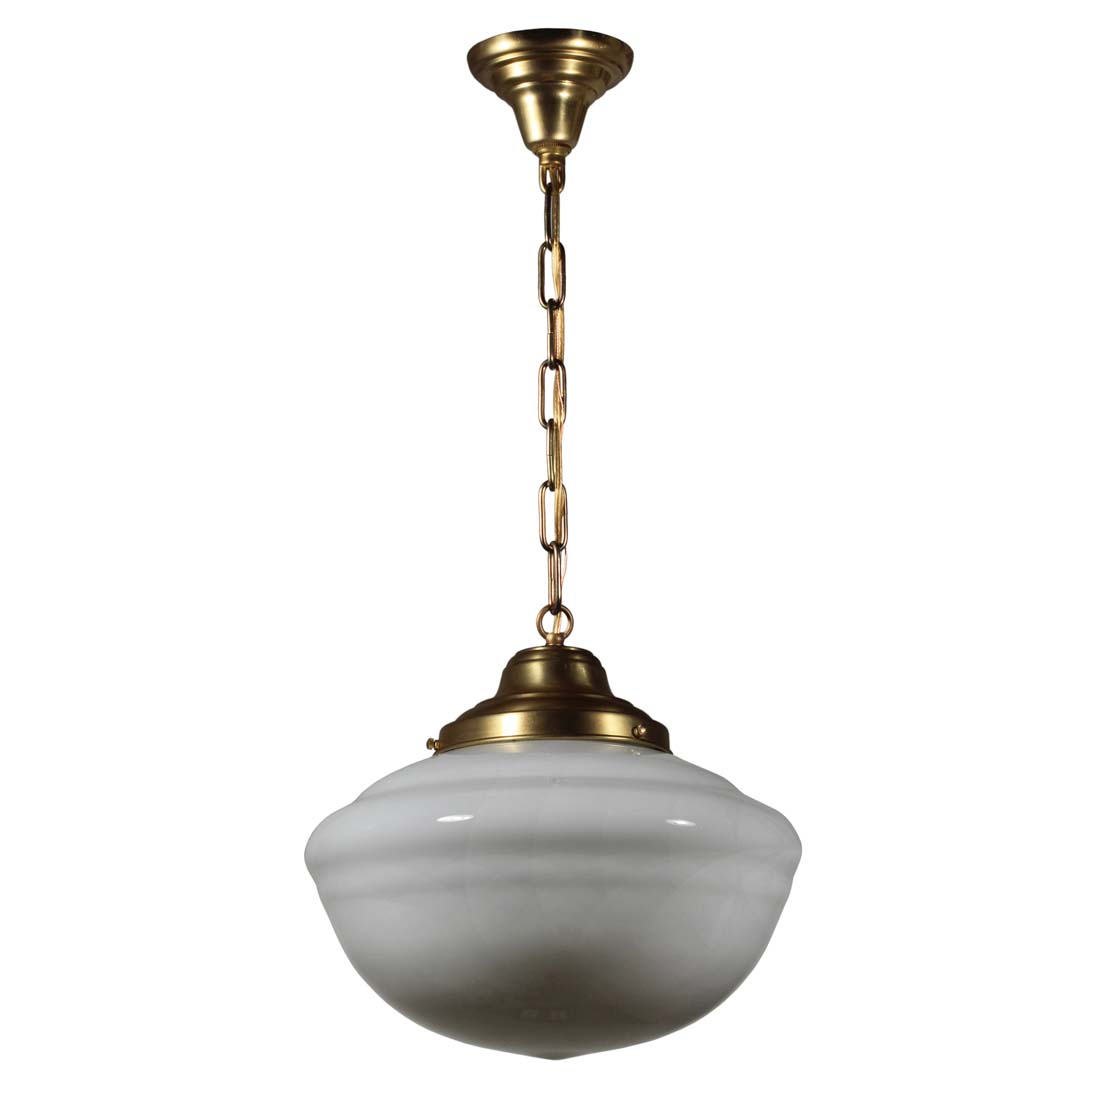 SOLD Antique Schoolhouse Pendant Light, c. 1920 - Archived Items - The ...